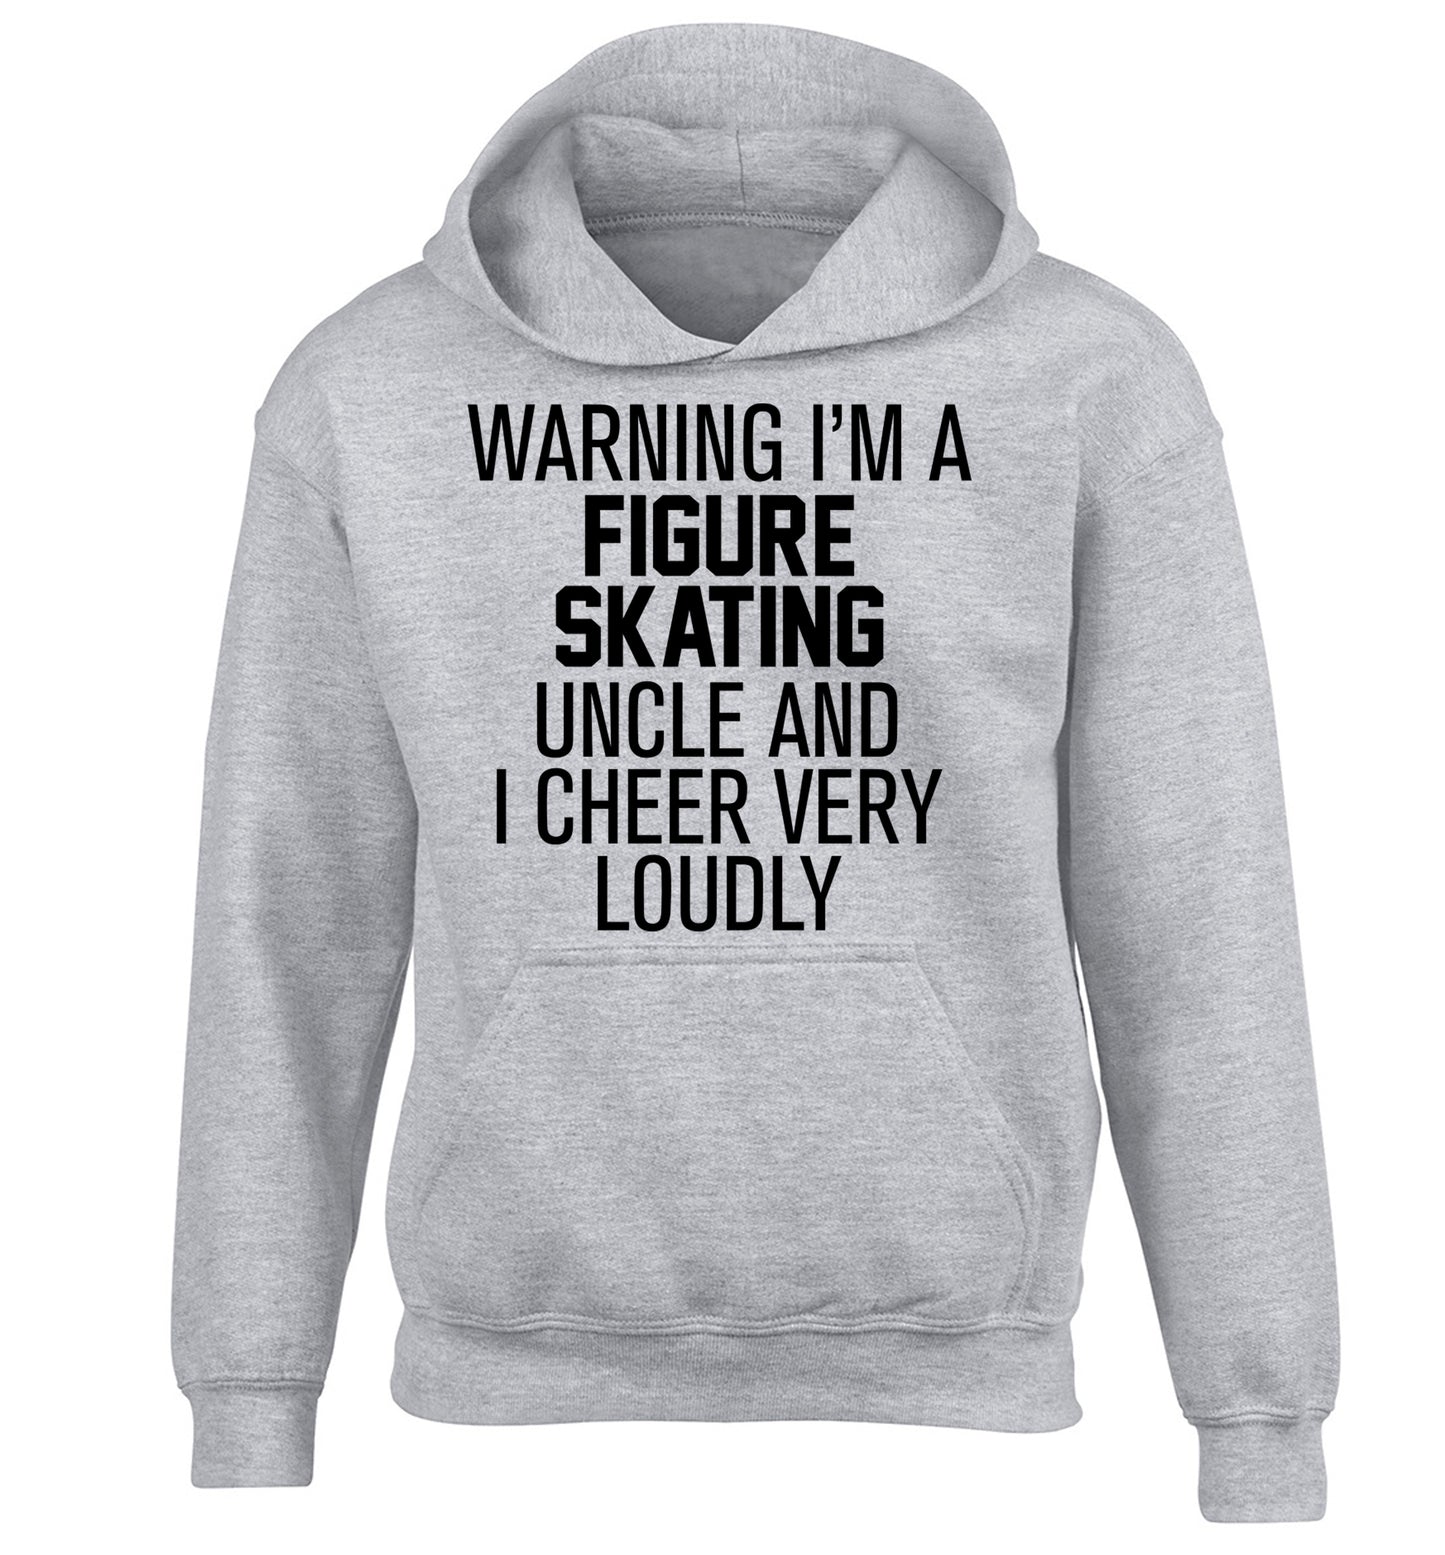 Warning I'm a figure skating uncle and I cheer very loudly children's grey hoodie 12-14 Years